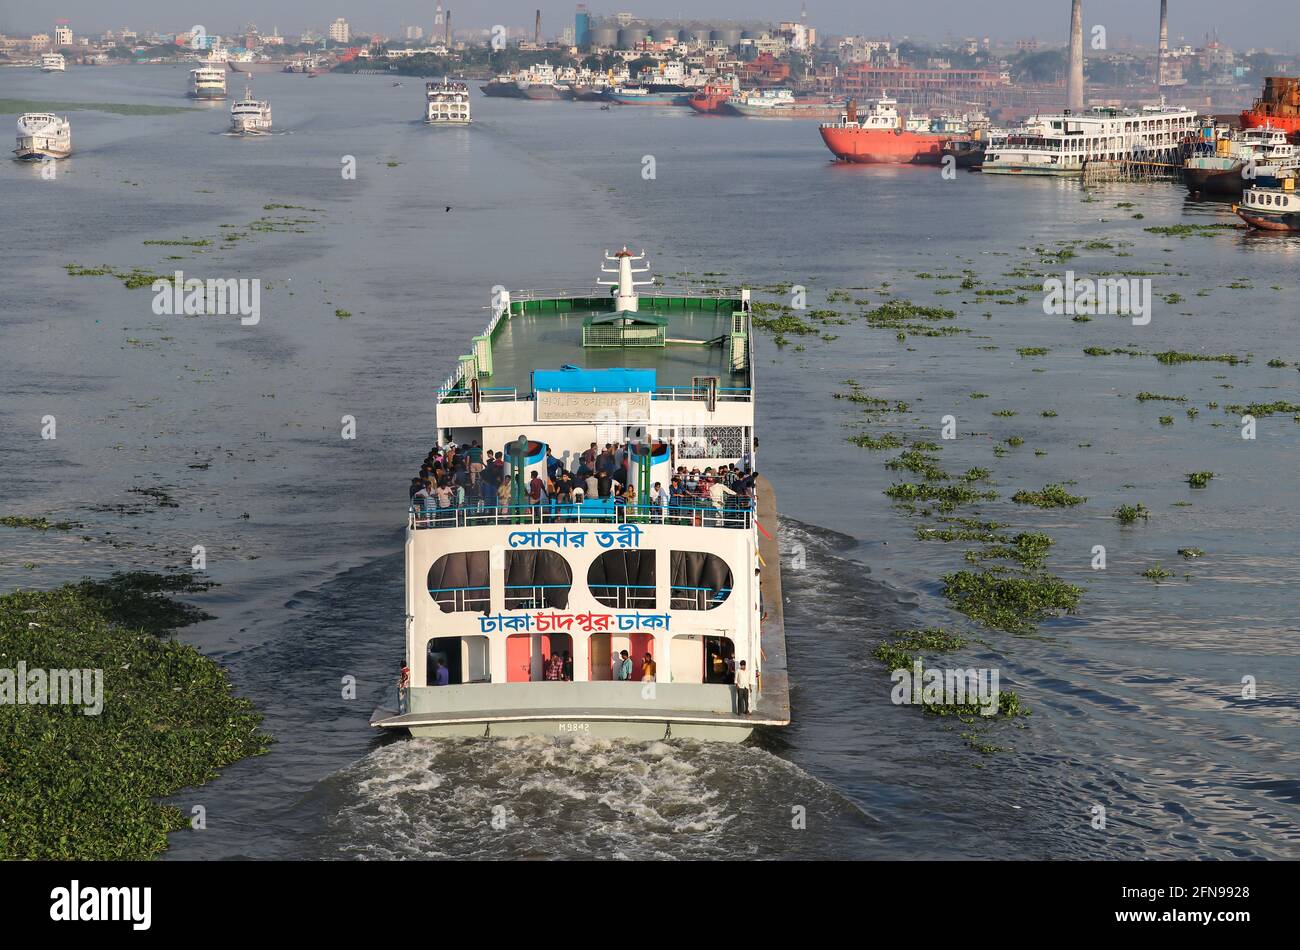 Dhaka, Bangladesh : People returning to home by overcrowded passenger ferry on the occasion of Eid al-Fitr Stock Photo